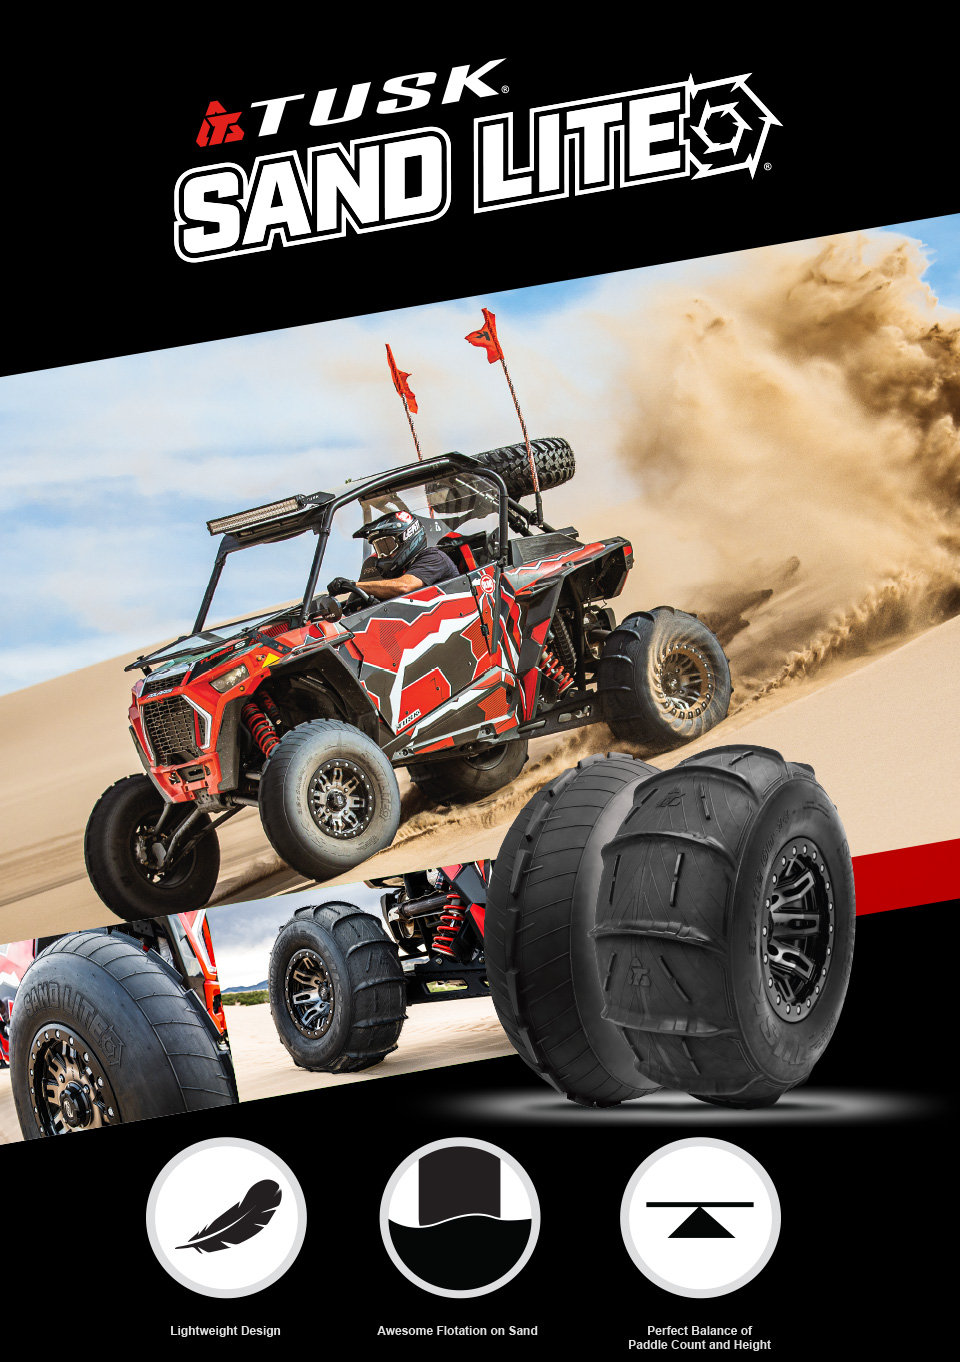 Tusk Sand Lite UTV Tires, Lightweight Design, Awesome Flotation on Sand, Perfect Balance of Paddle Count and Height, a Polaris RZR XP 1000 coming down a sand dune with a closeup shot of the front and rear tires.